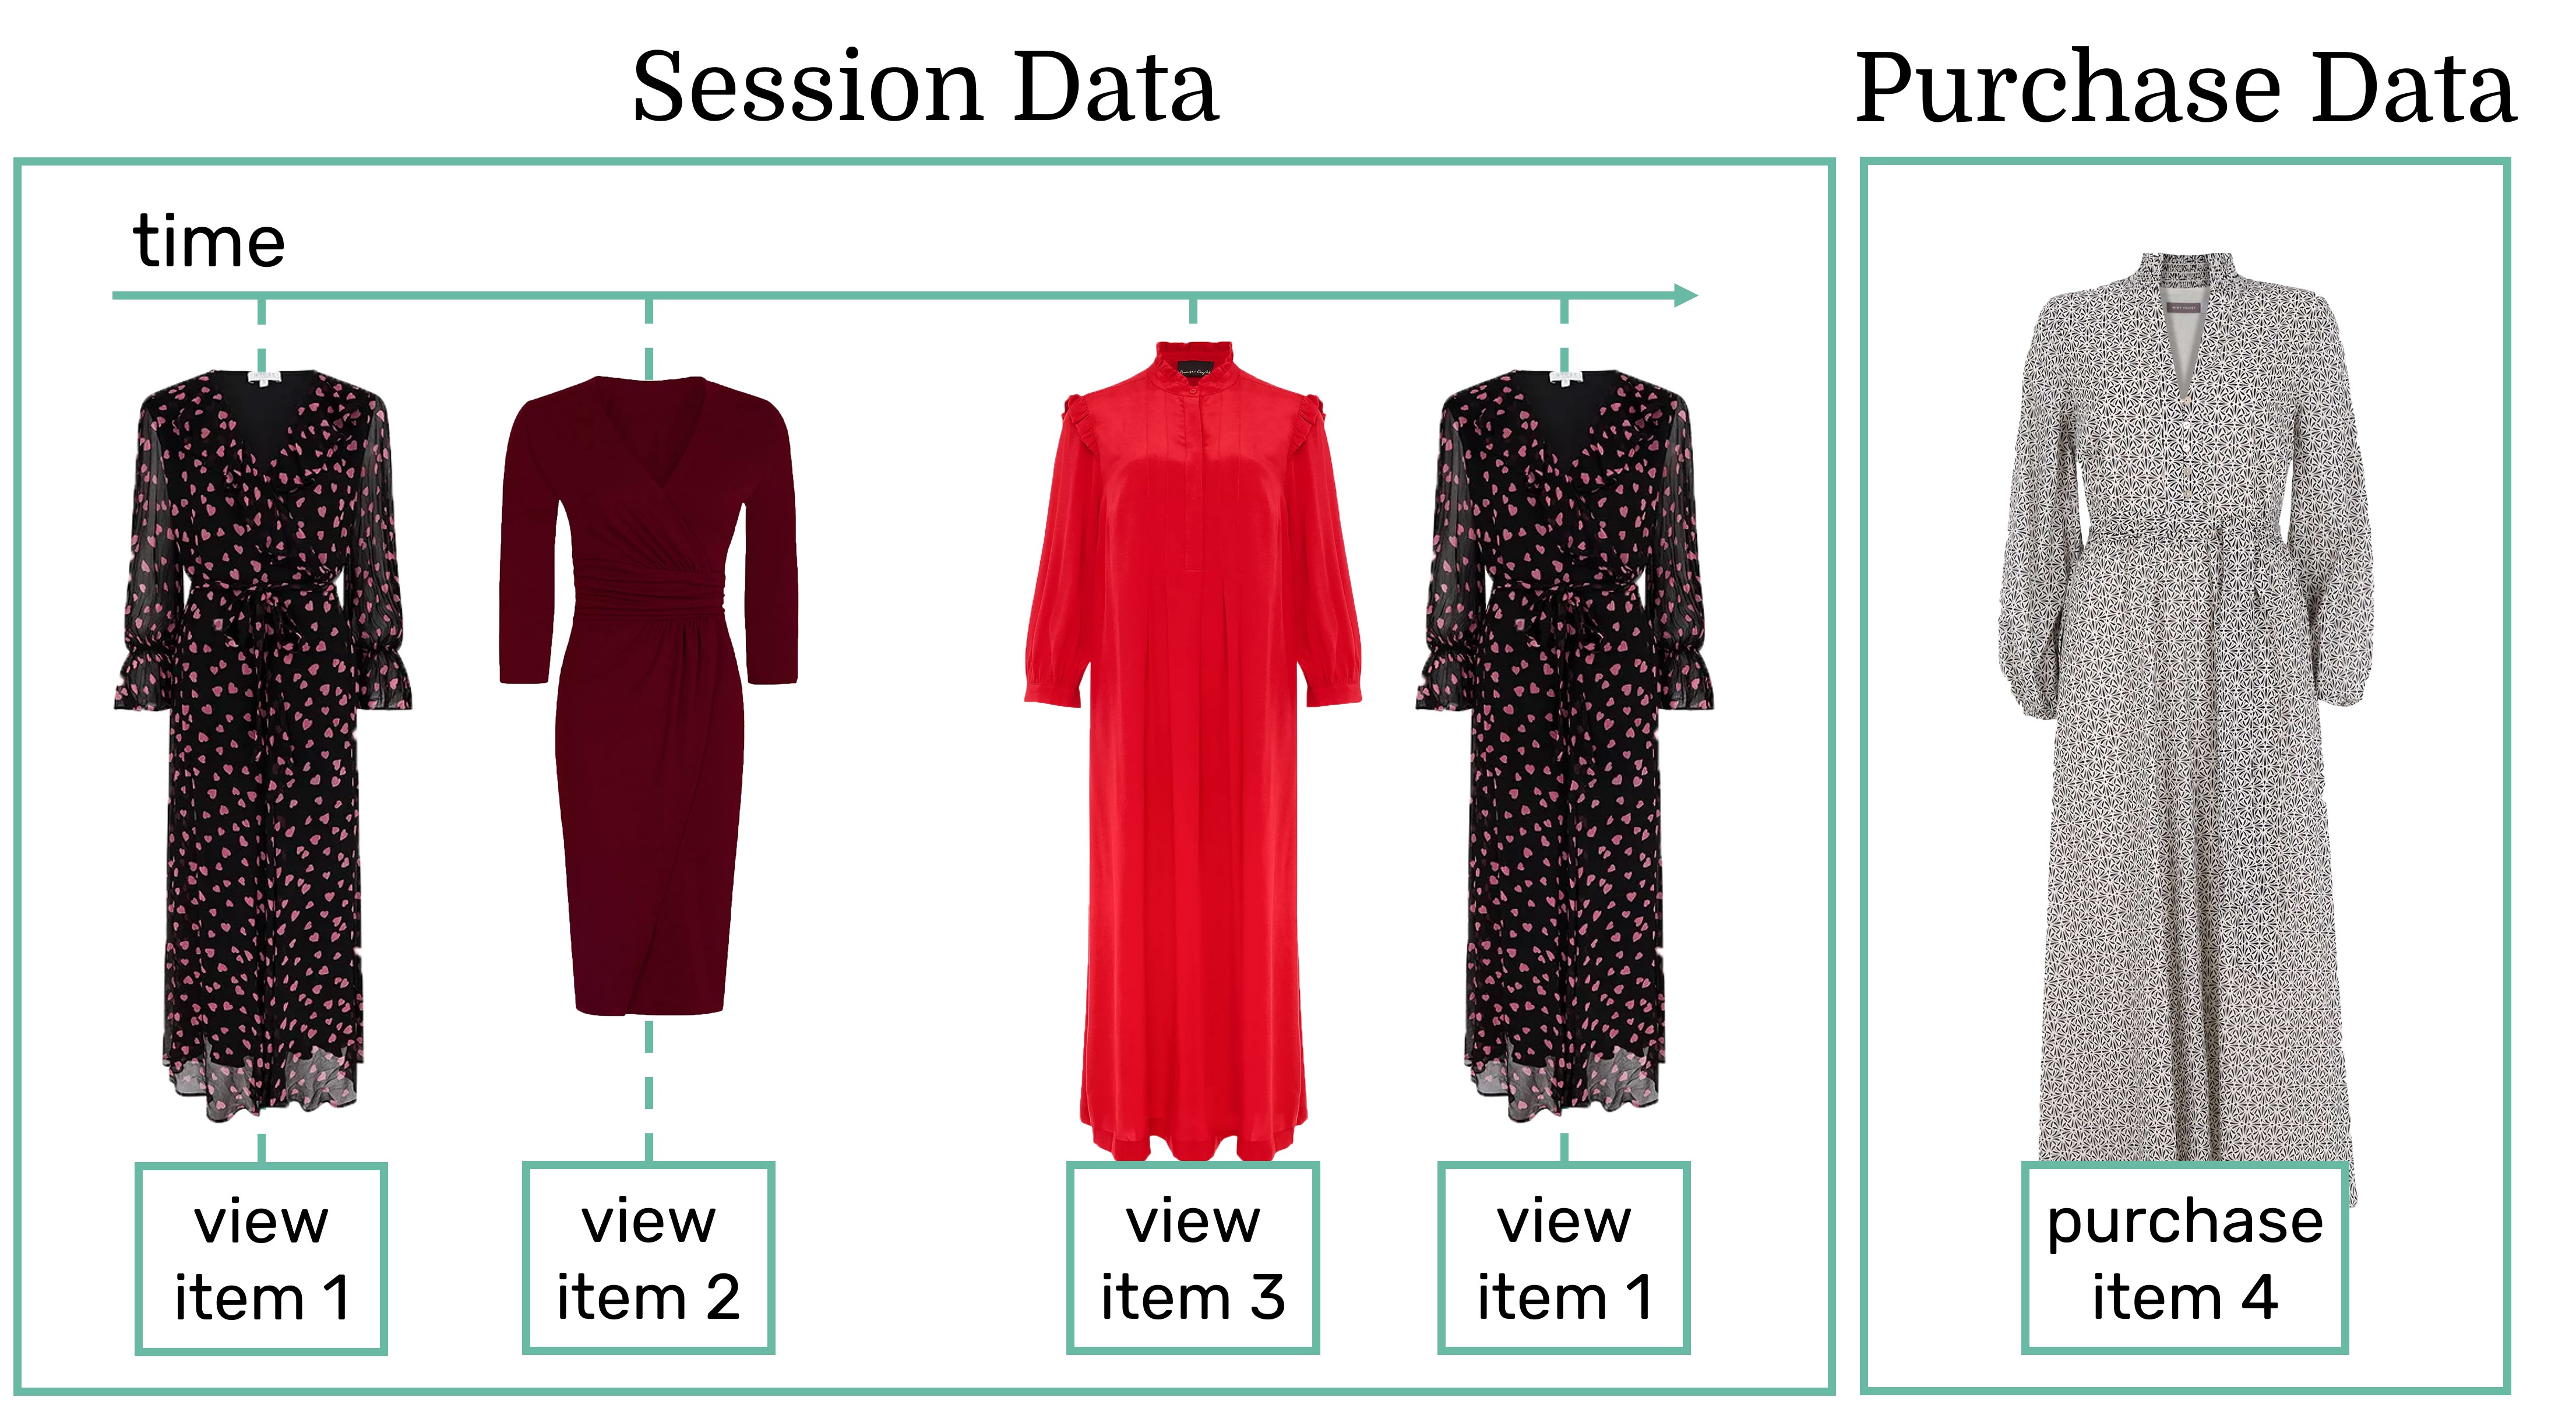 Example of the limited amount of session data provided to a fashion recommender system